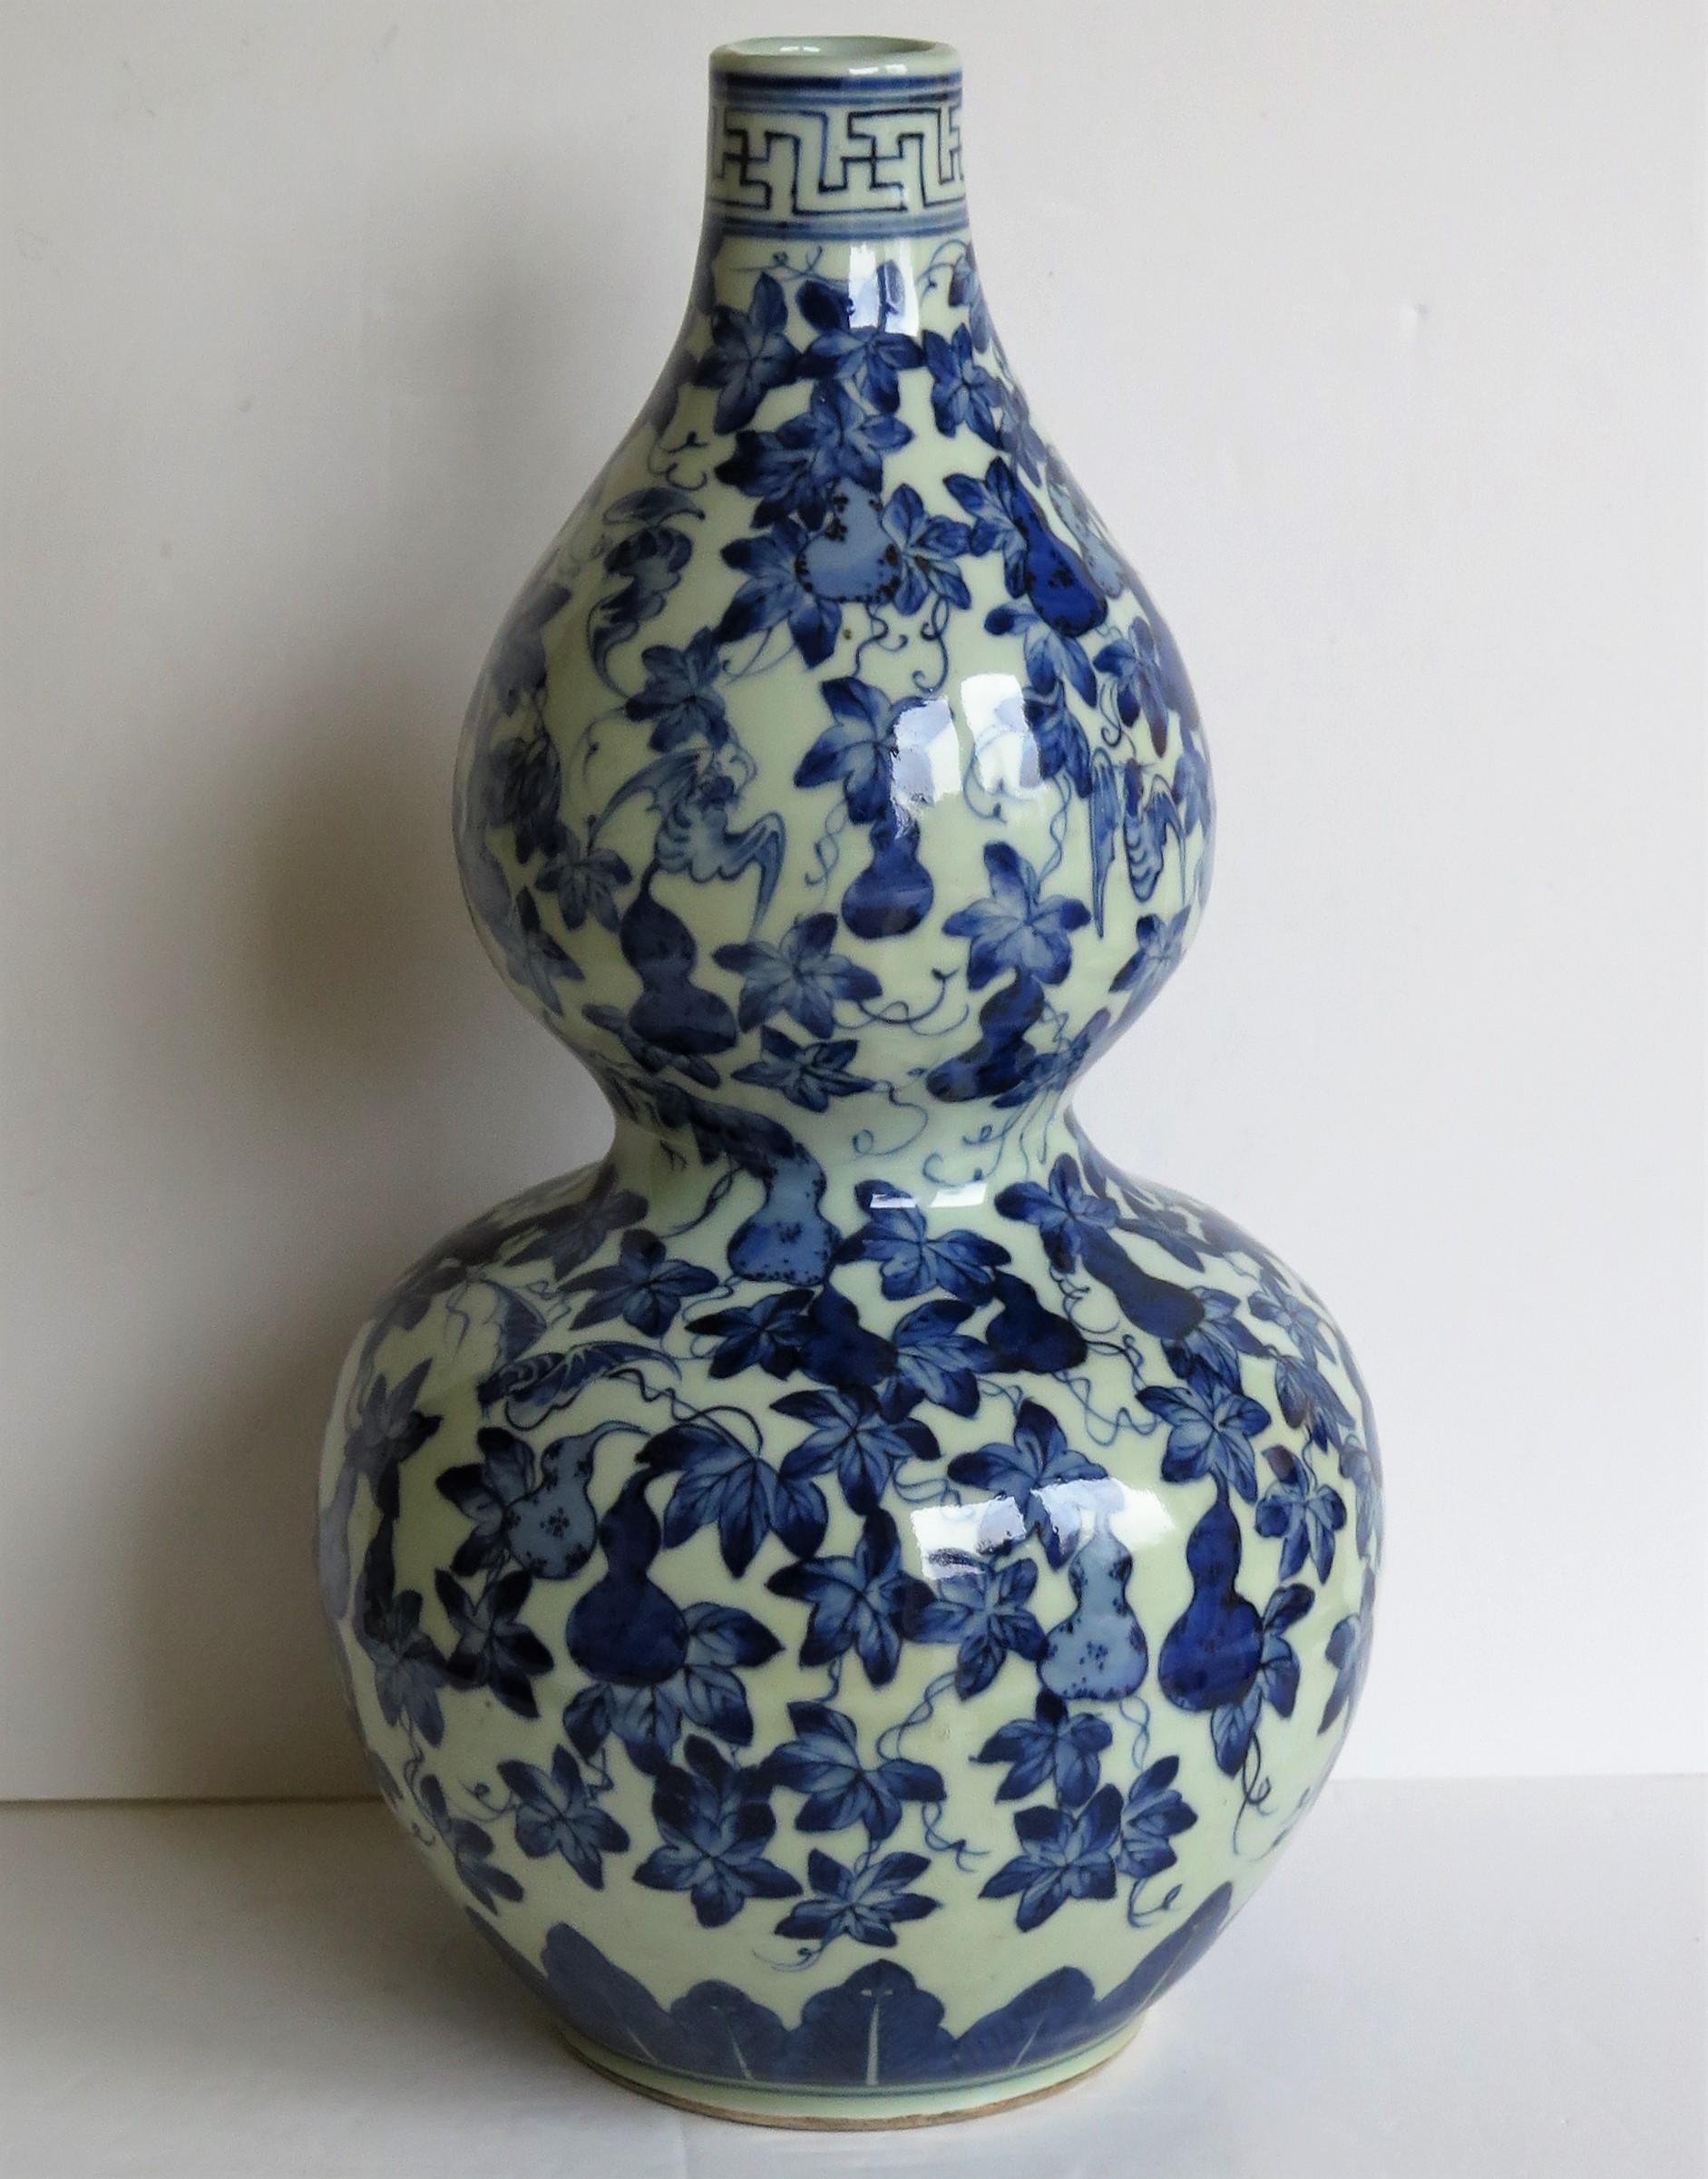 This is a beautiful, fairly tall 34+cm, Chinese Export, blue and white porcelain double gourd vase, which we date to the mid 19th century, Qing period.

This is a well hand potted piece with a very good double gourd shape.

The vase is handmade and